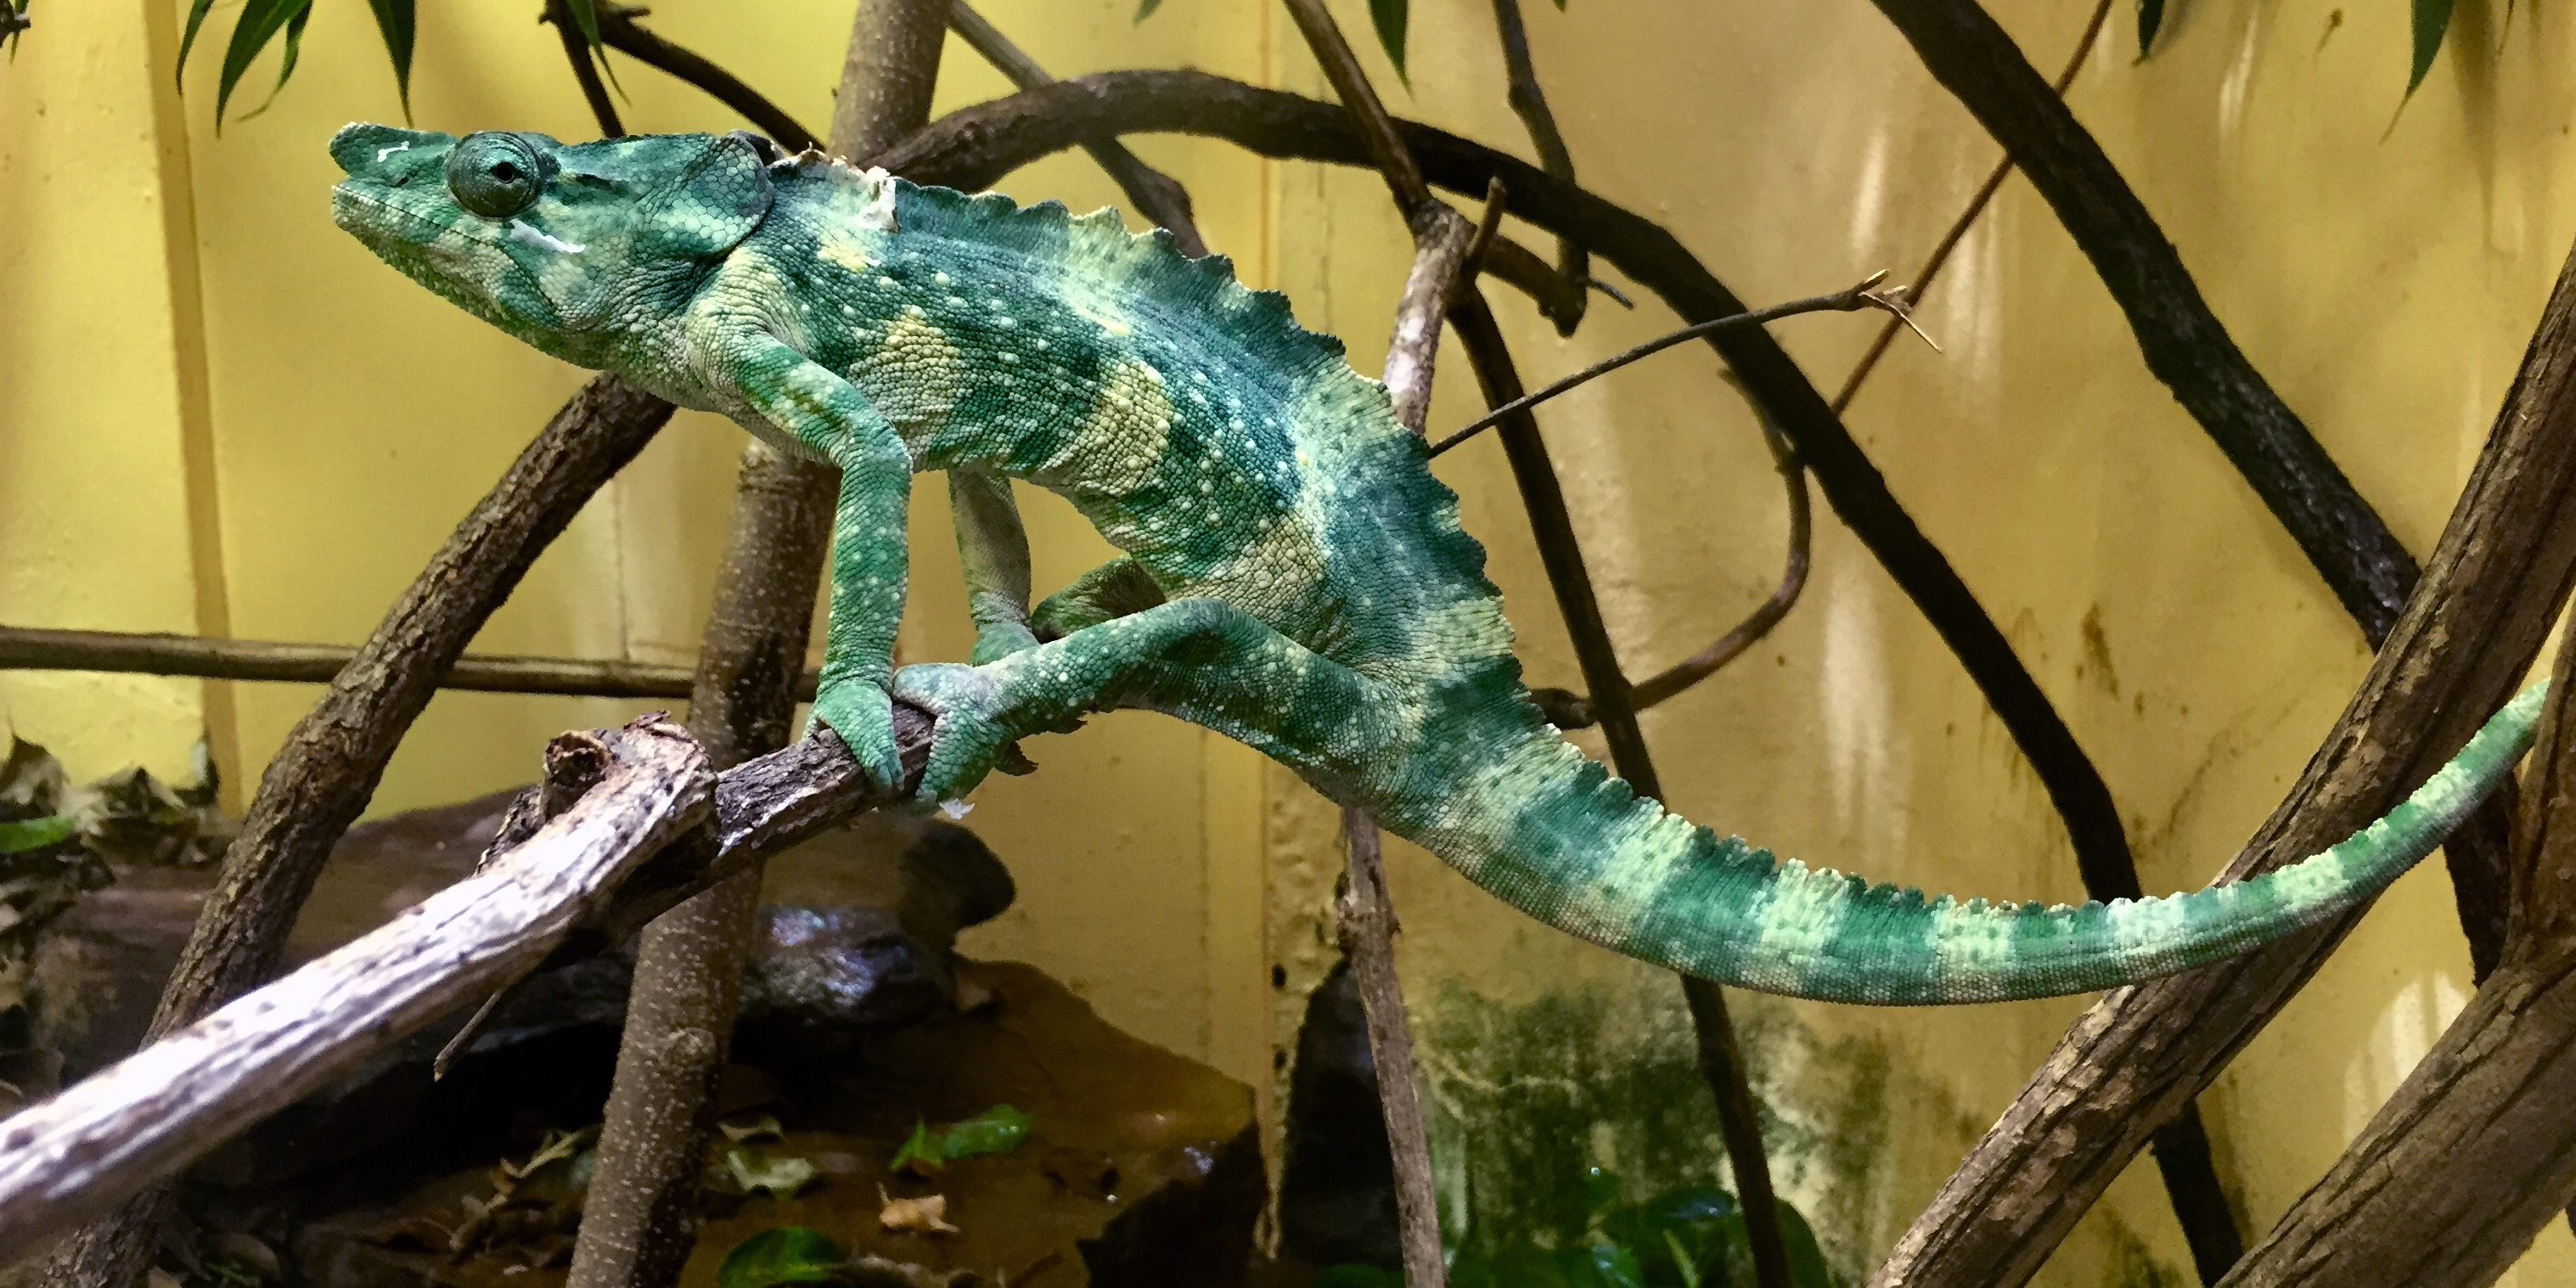 New at the Zoo: Meet a Meller's Chameleon | Smithsonian's National Zoo